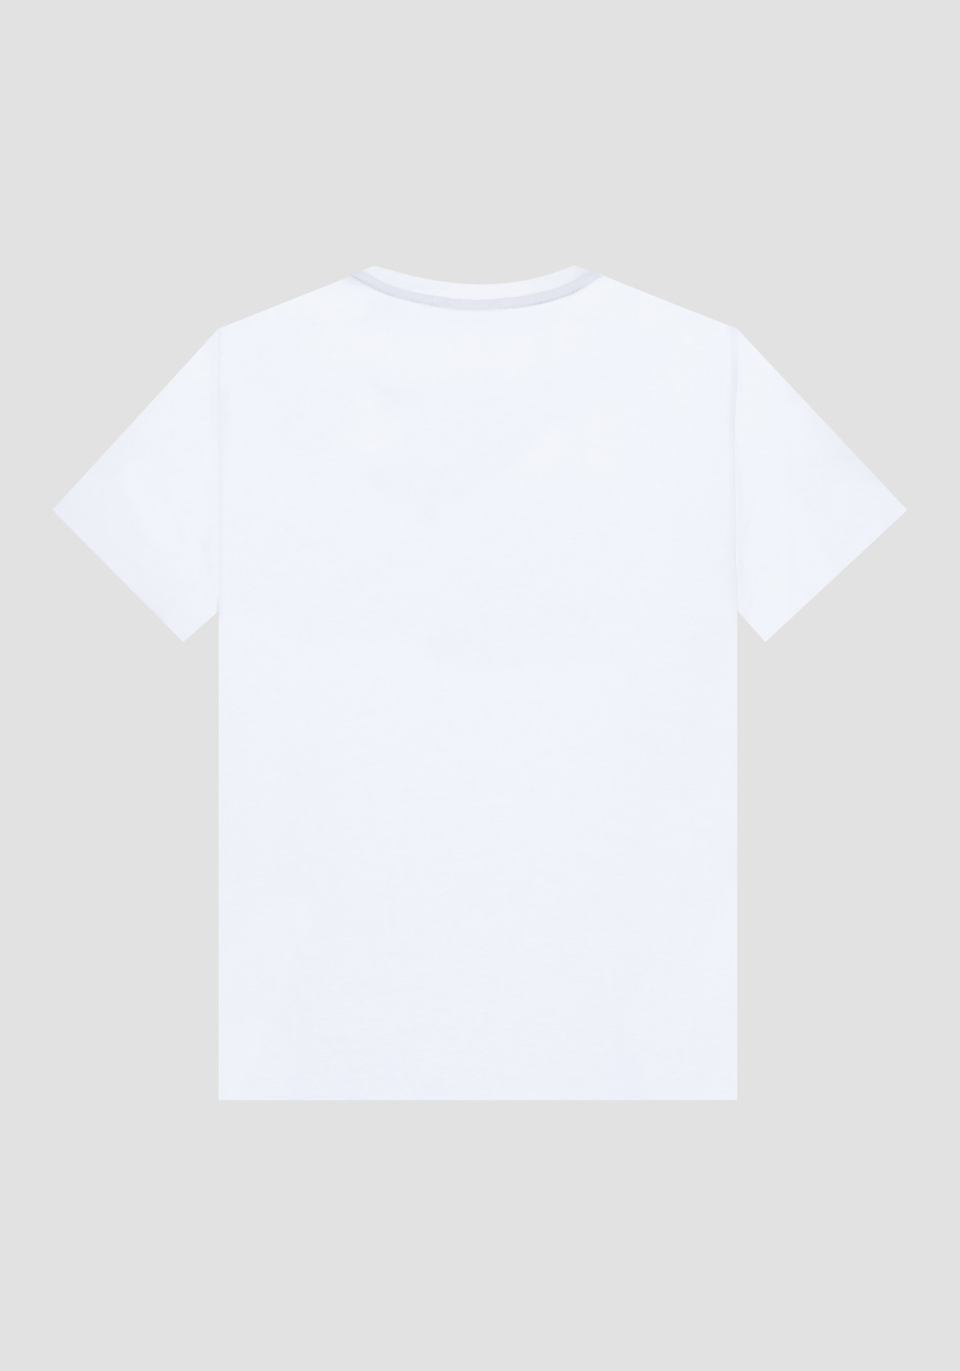 SUPER SLIM FIT T-SHIRT IN STRETCH COTTON WITH CONTRASTING LOGO - Antony Morato Online Shop